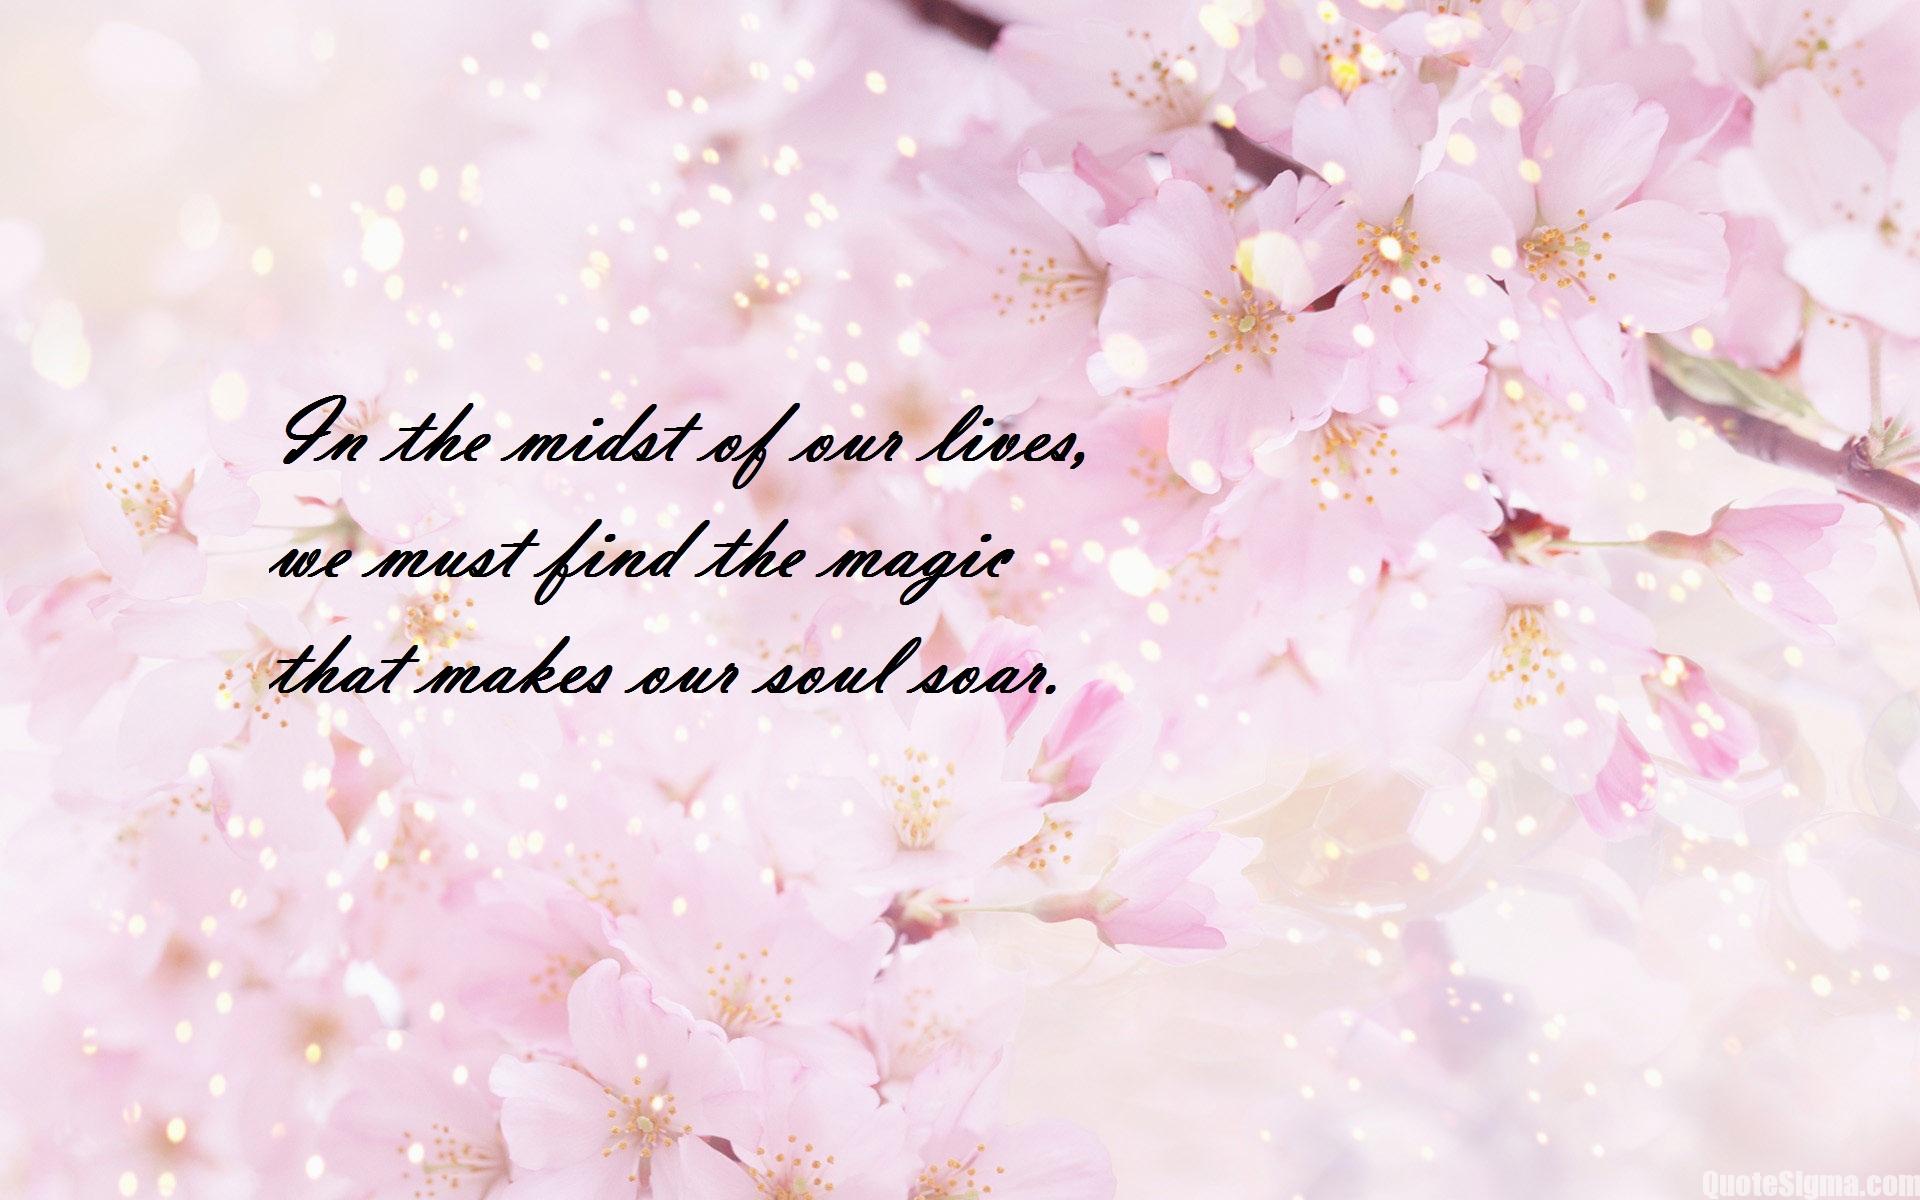 In the midst of our lives, we must find the magic that makes our souls soar